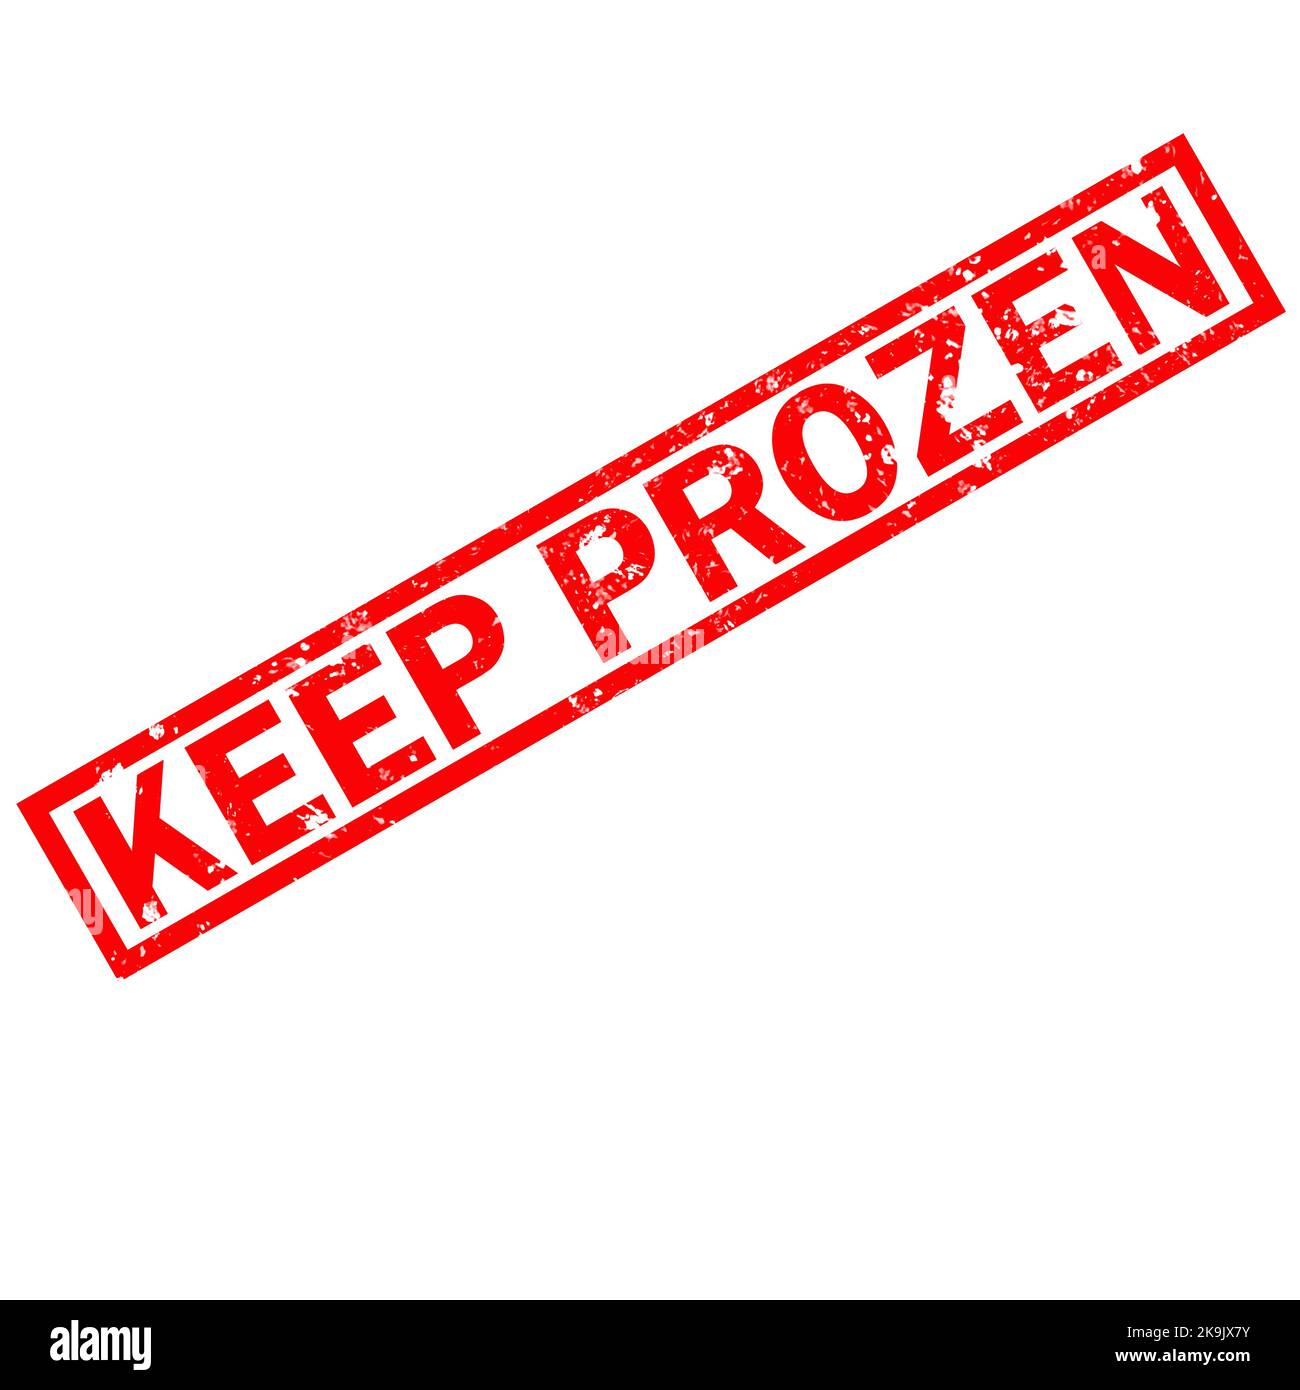 Keep Frozen red grunge rubber stamp on white background. Keep Frozen stamp sign. Keep Frozen symbol. Flat style. Stock Photo